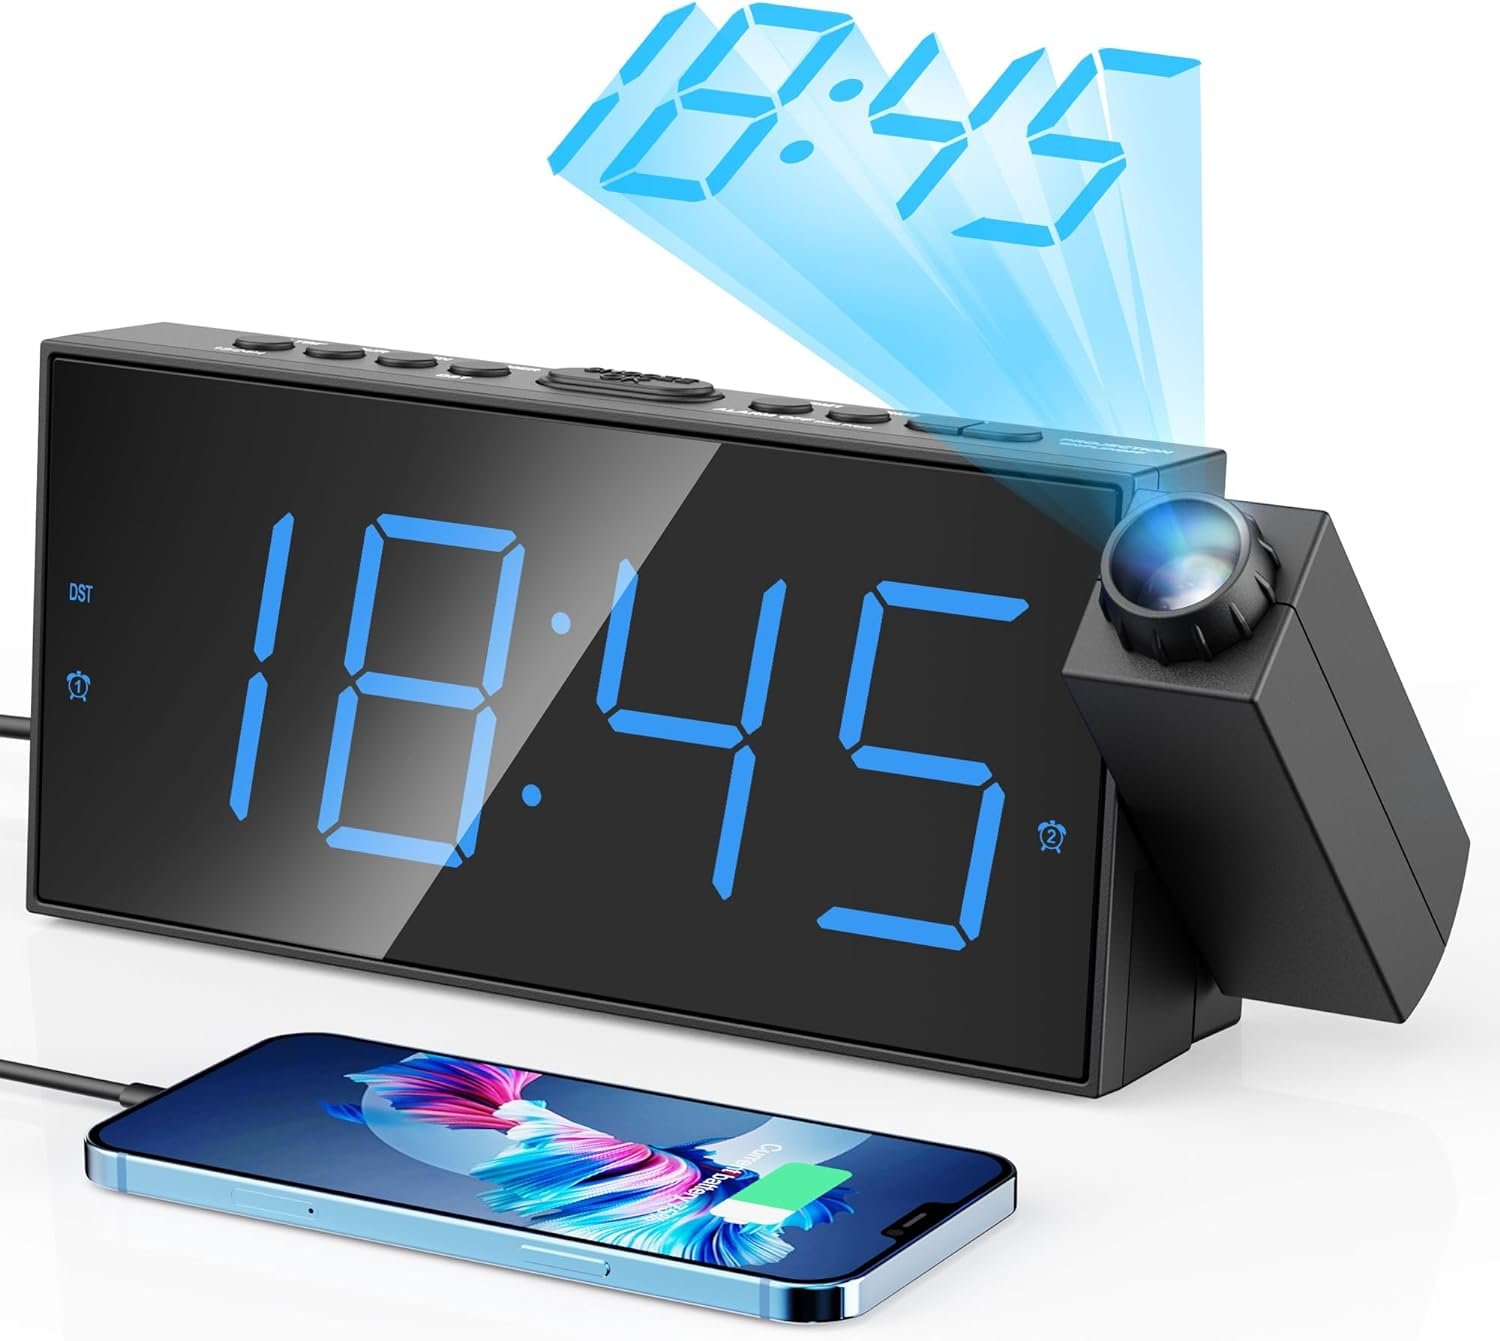 How to Change Time on Projection Alarm Clock